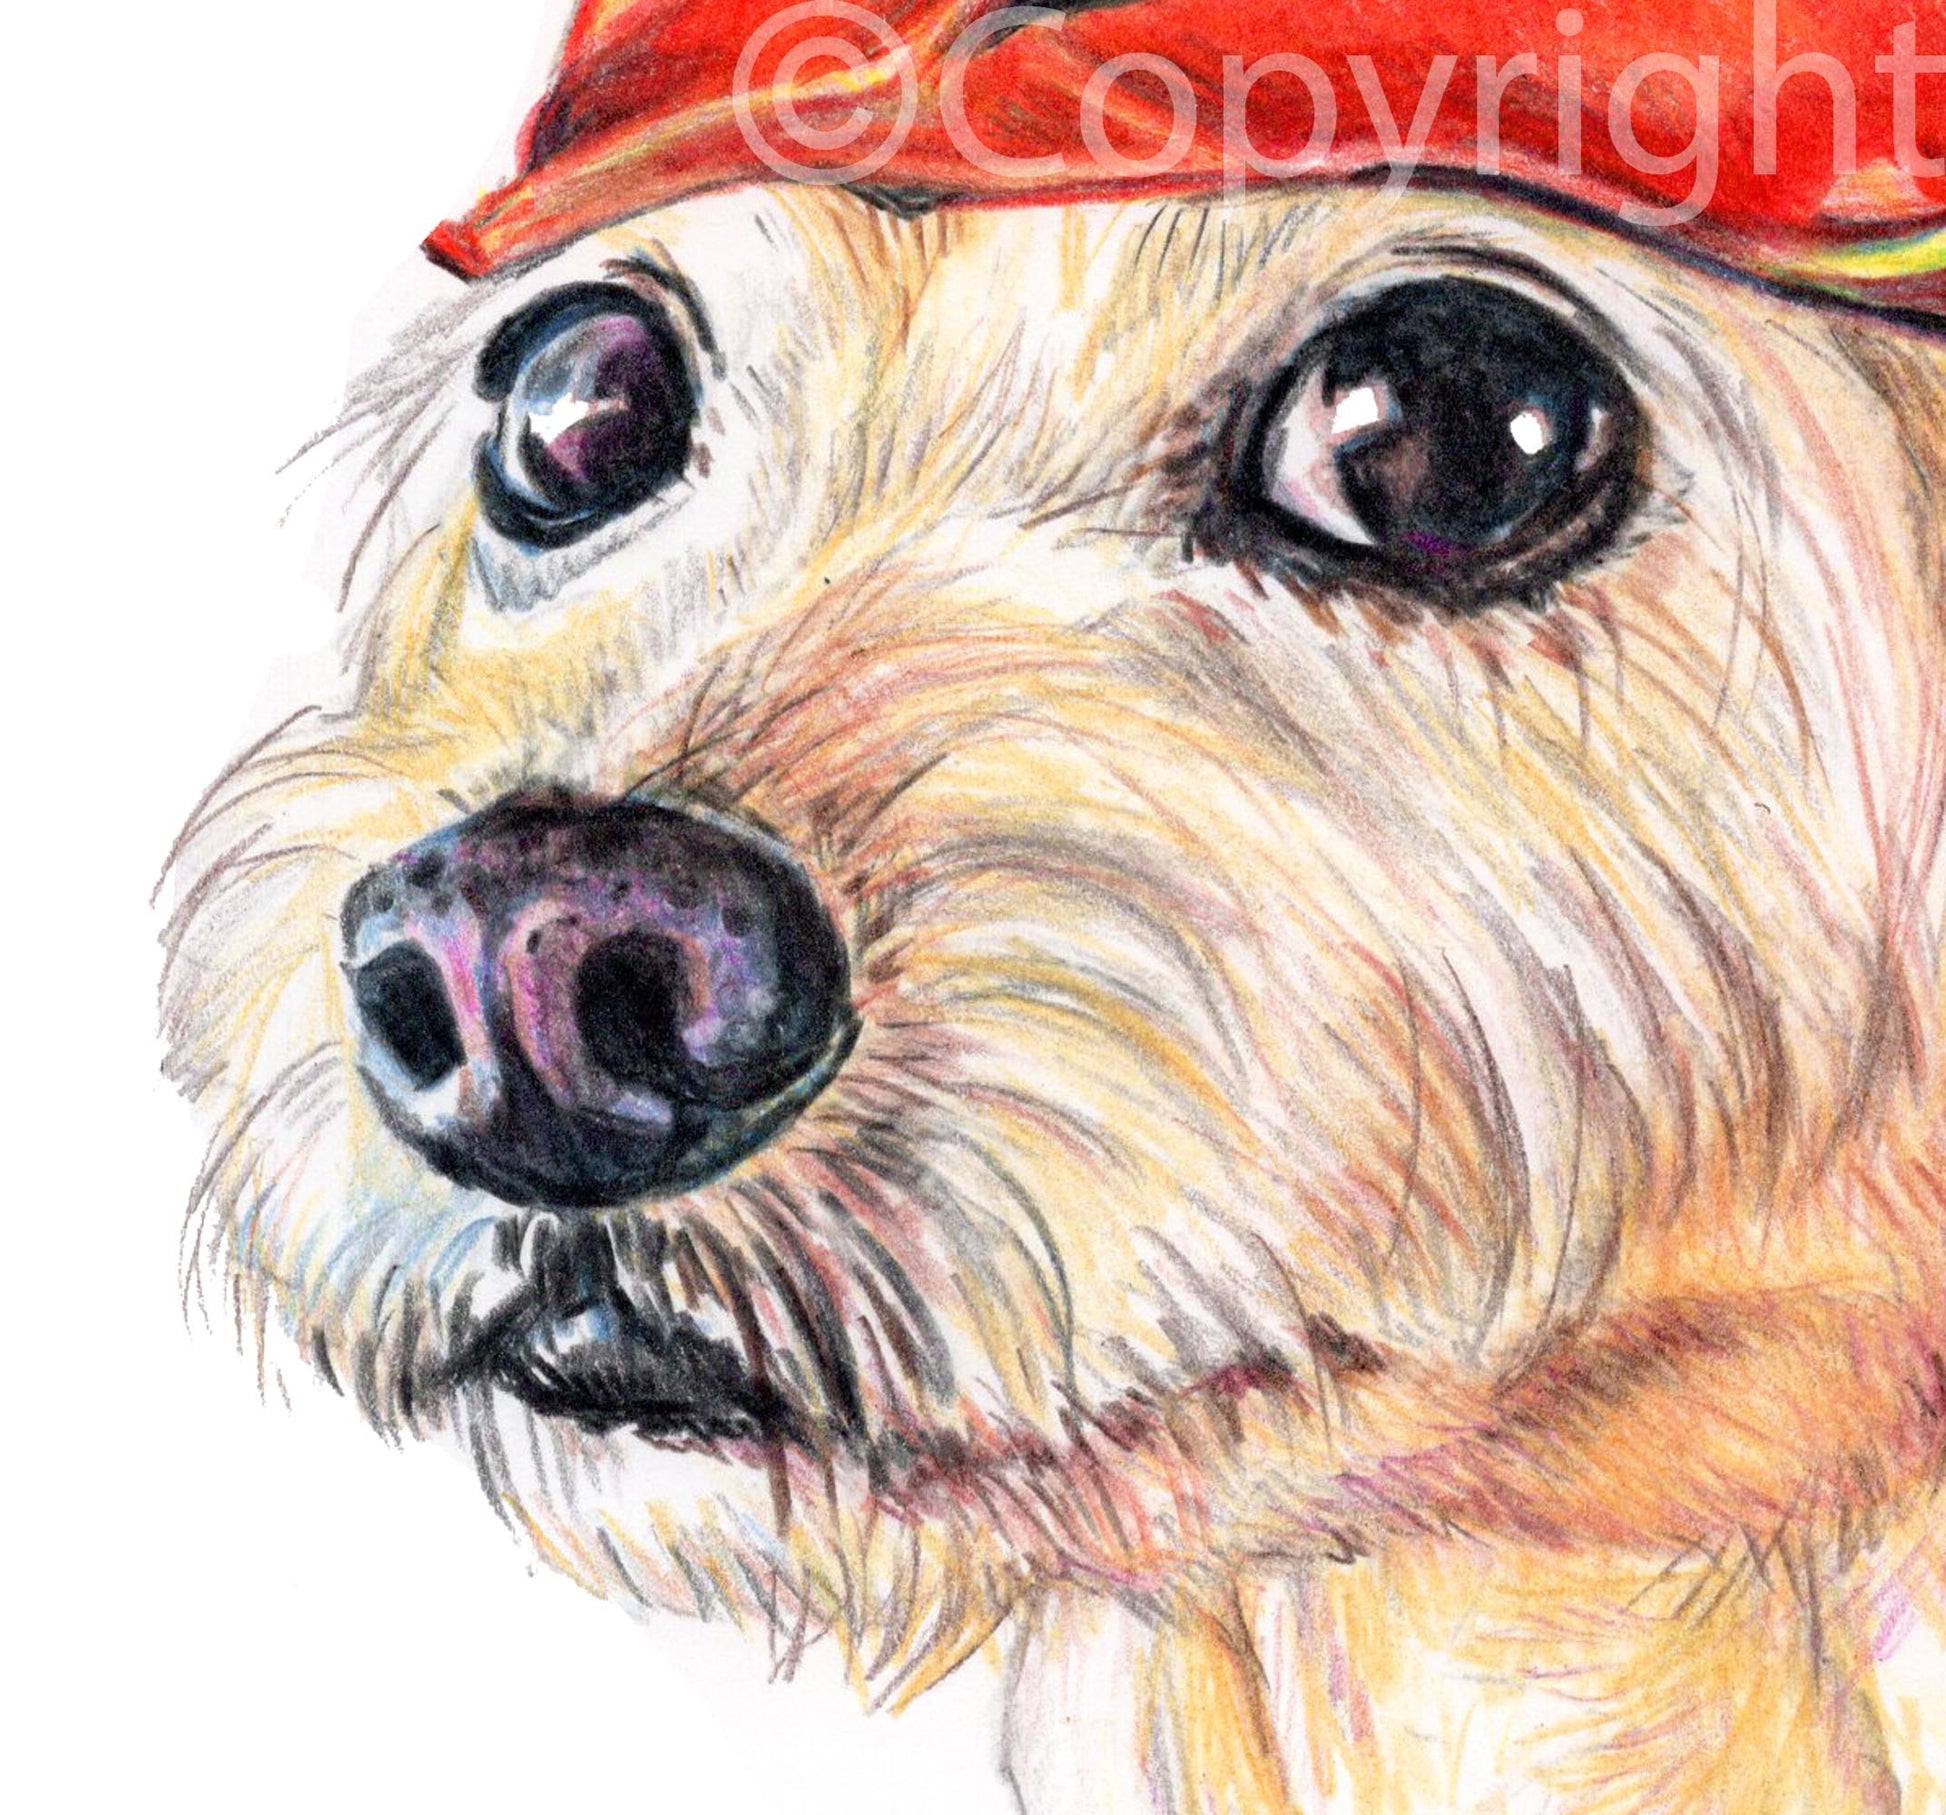 Coloured pencil drawing of a terrier dog wearing a chip bag as a hat. Art by Deidre Wicks